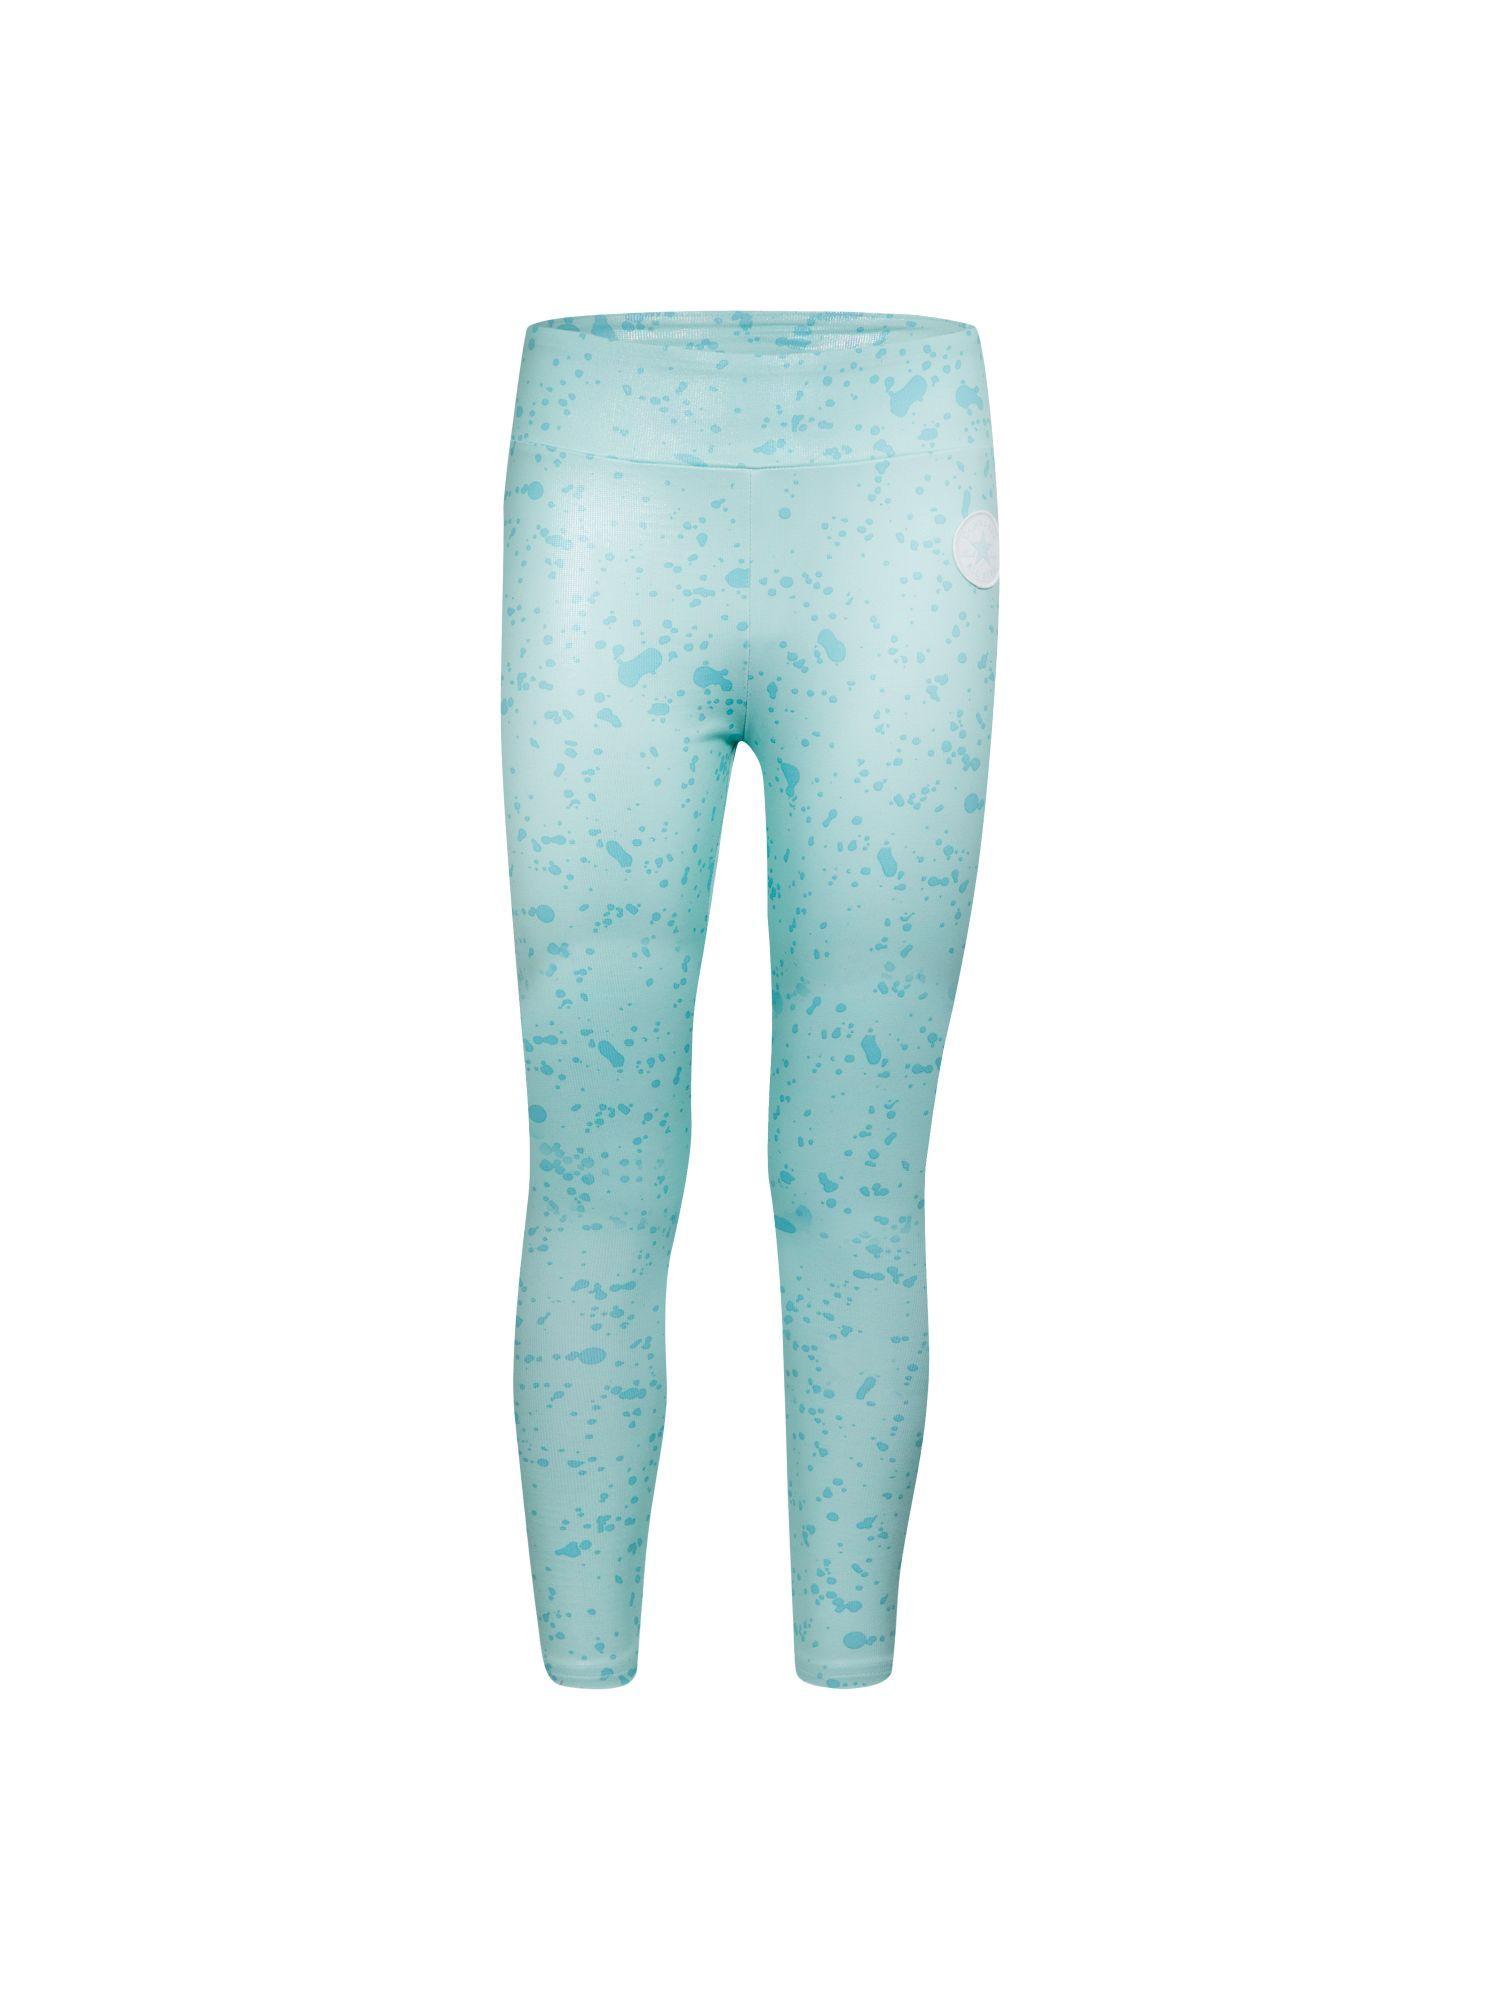 girls turquoise printed bottoms